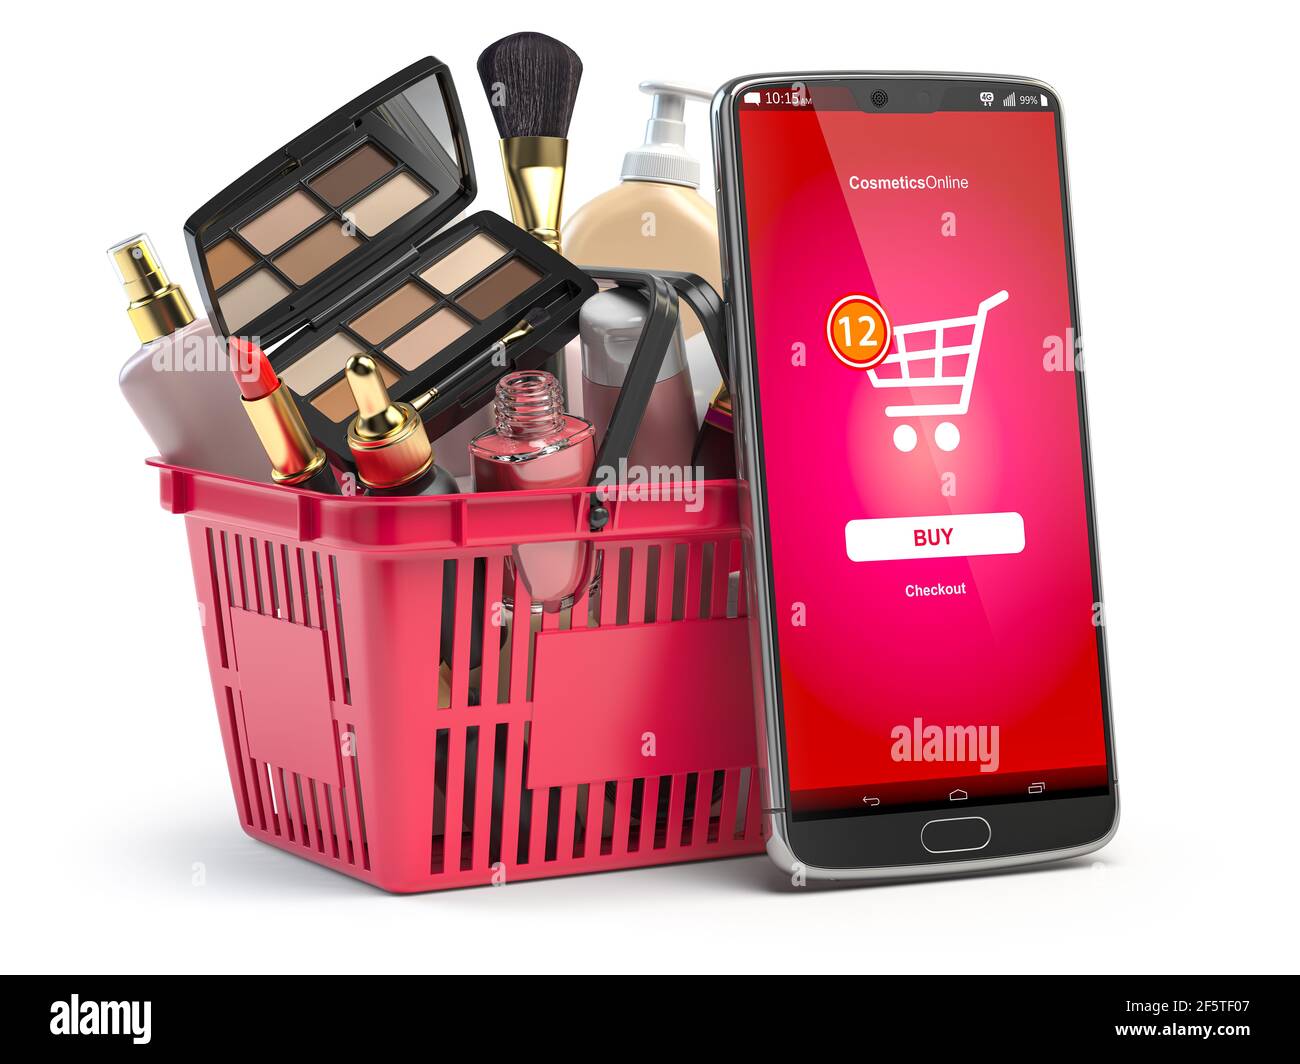 Cosmetics and beauty products buying online concept. Shopping basket with  makeup products and mobile phone with app for buying on the screen. 3d  illus Stock Photo - Alamy